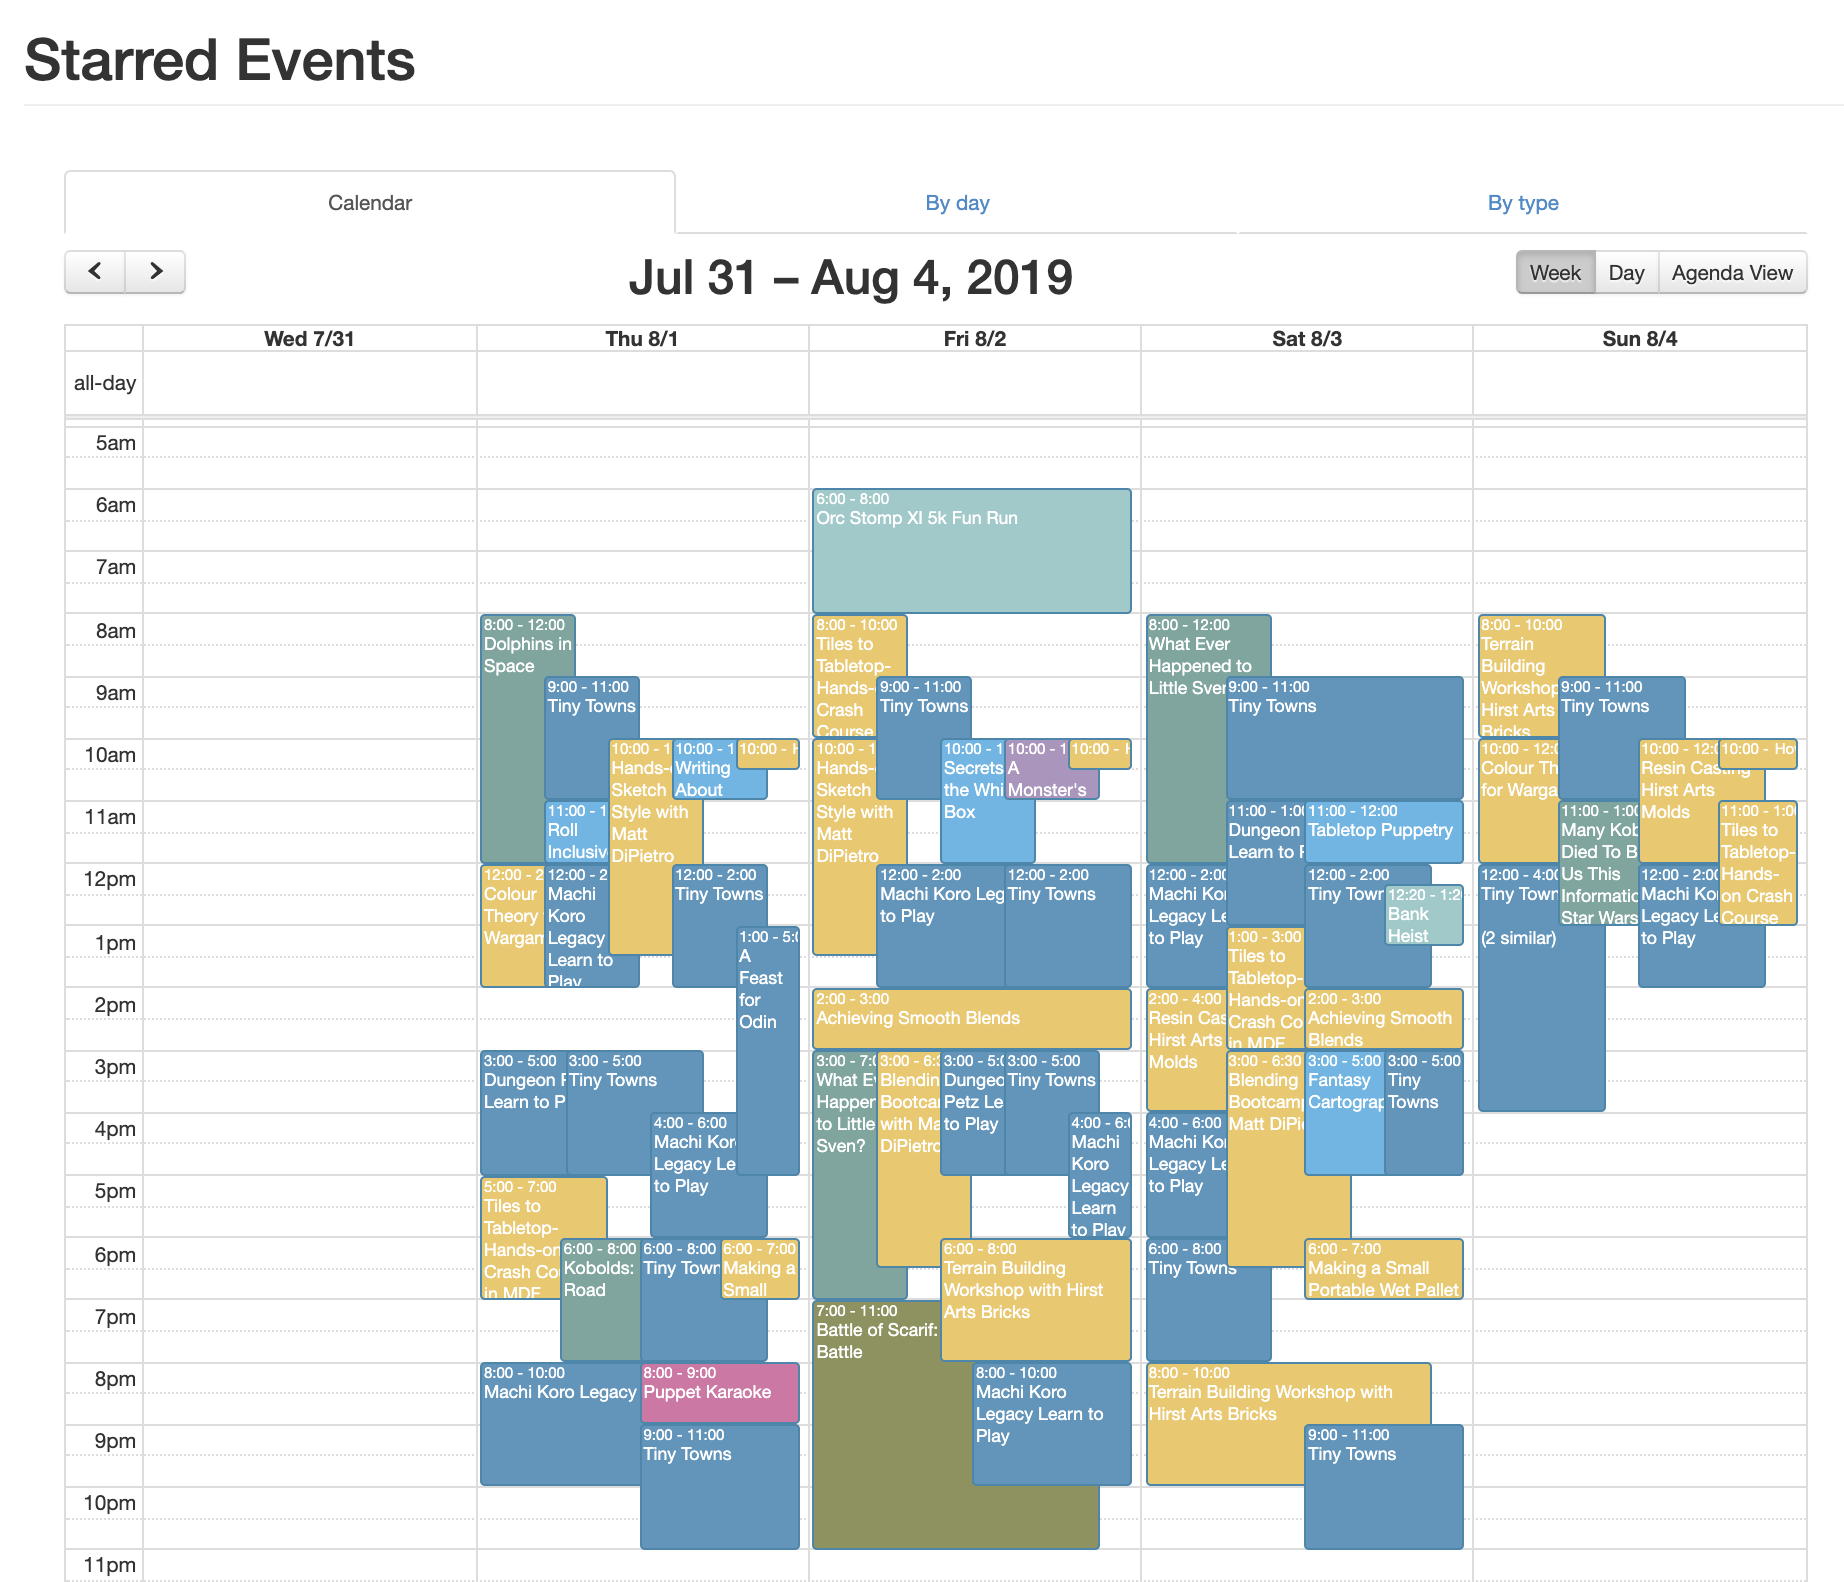 A screenshot of the starred events view.